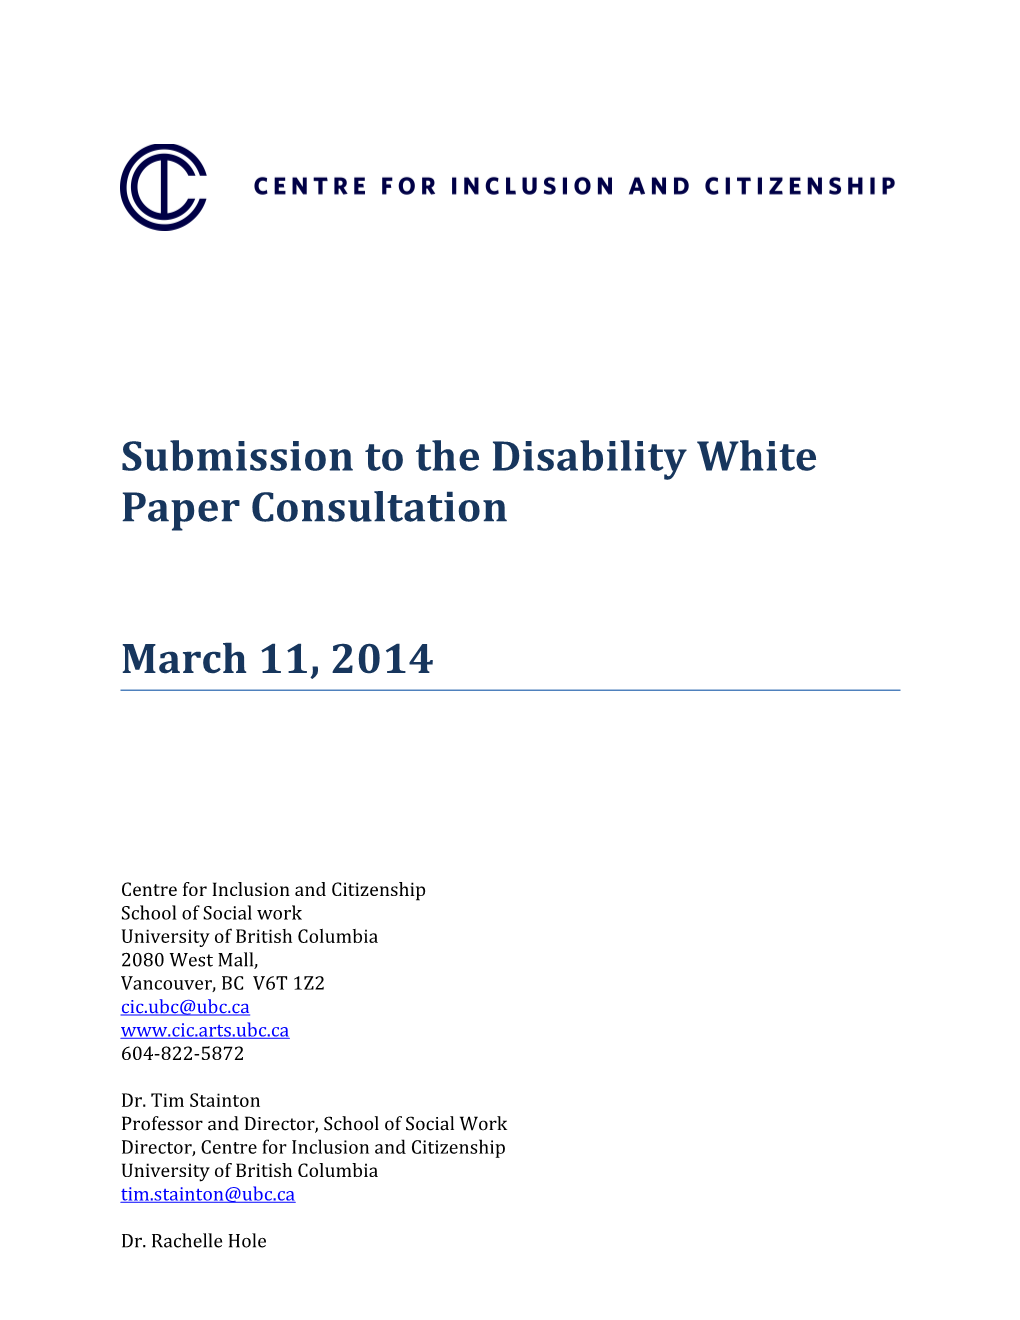 Submission to the Disability White Paper Consultation